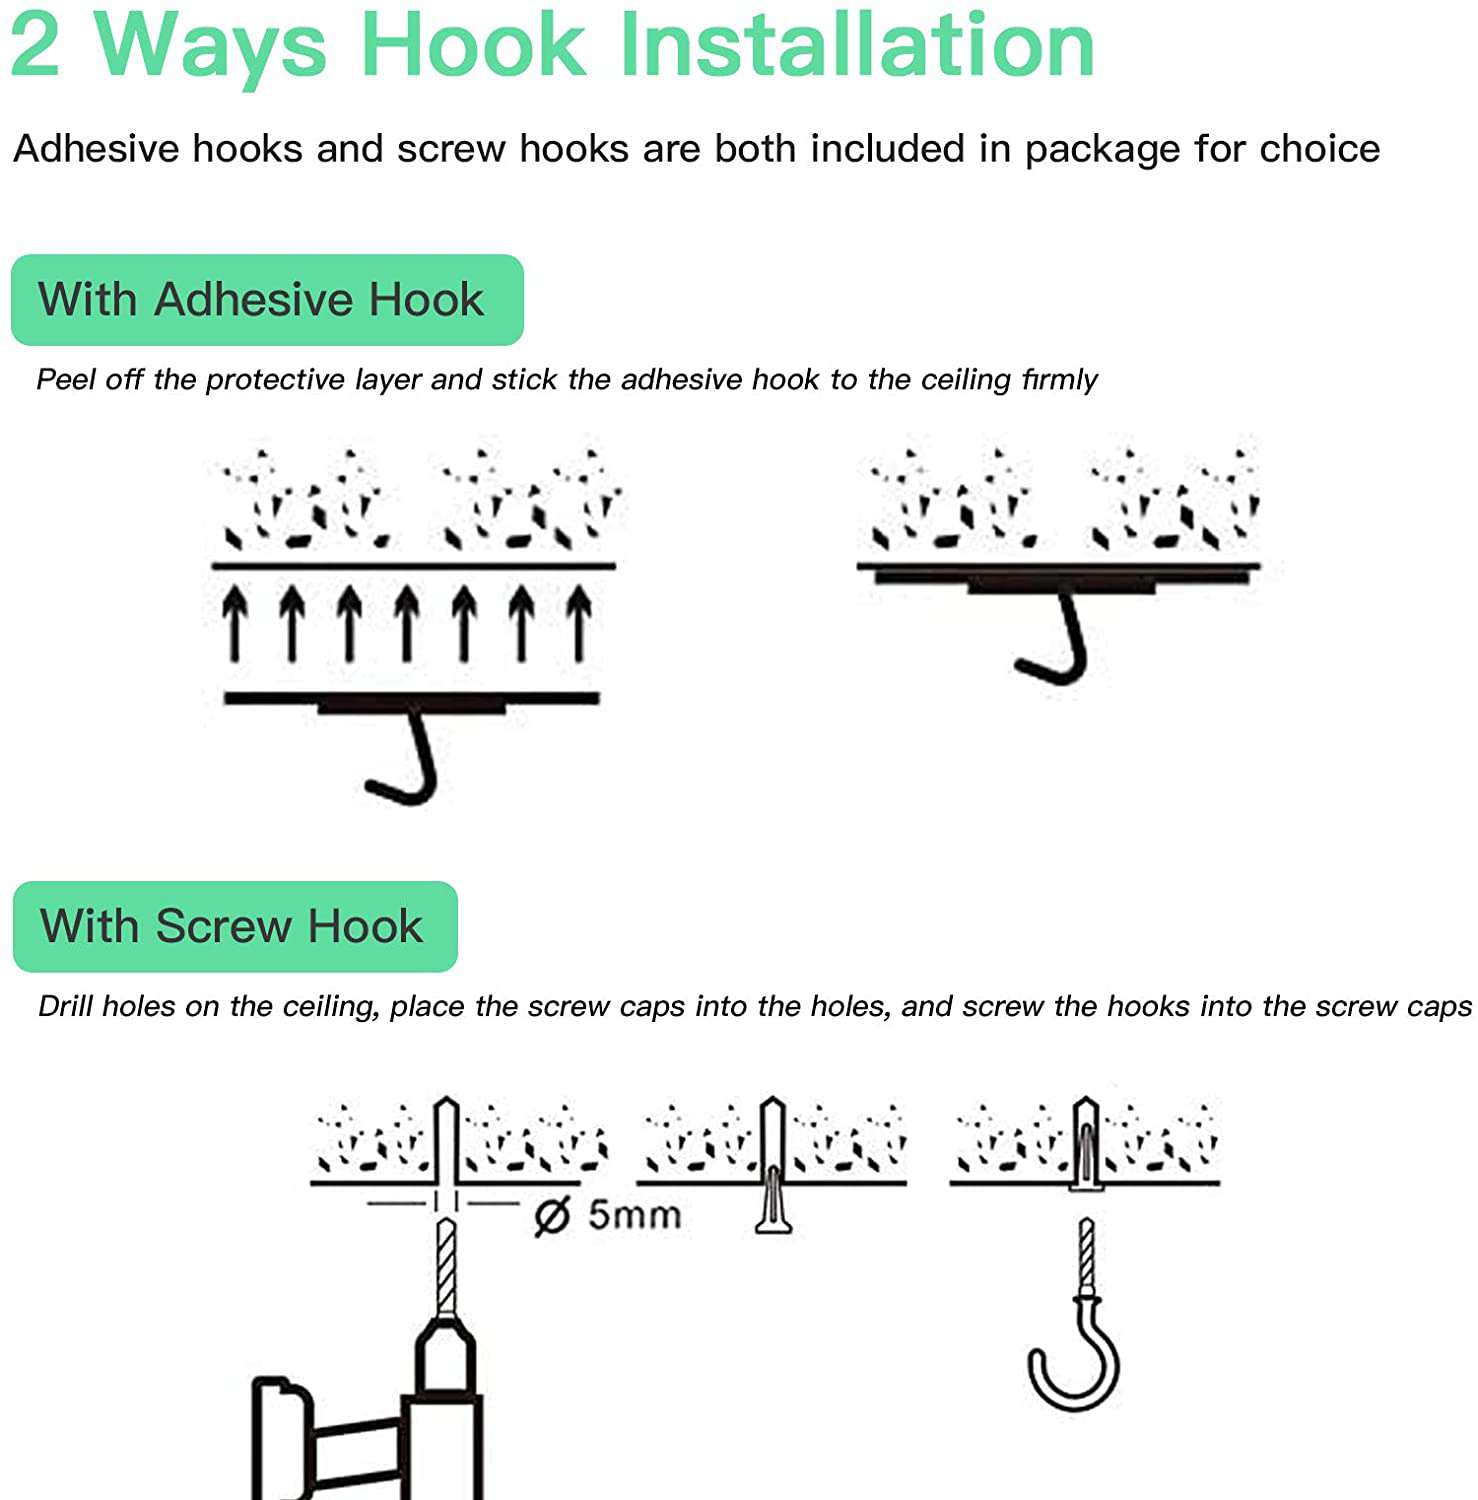 2 installation options: adhesive hooks and screw hooks included.